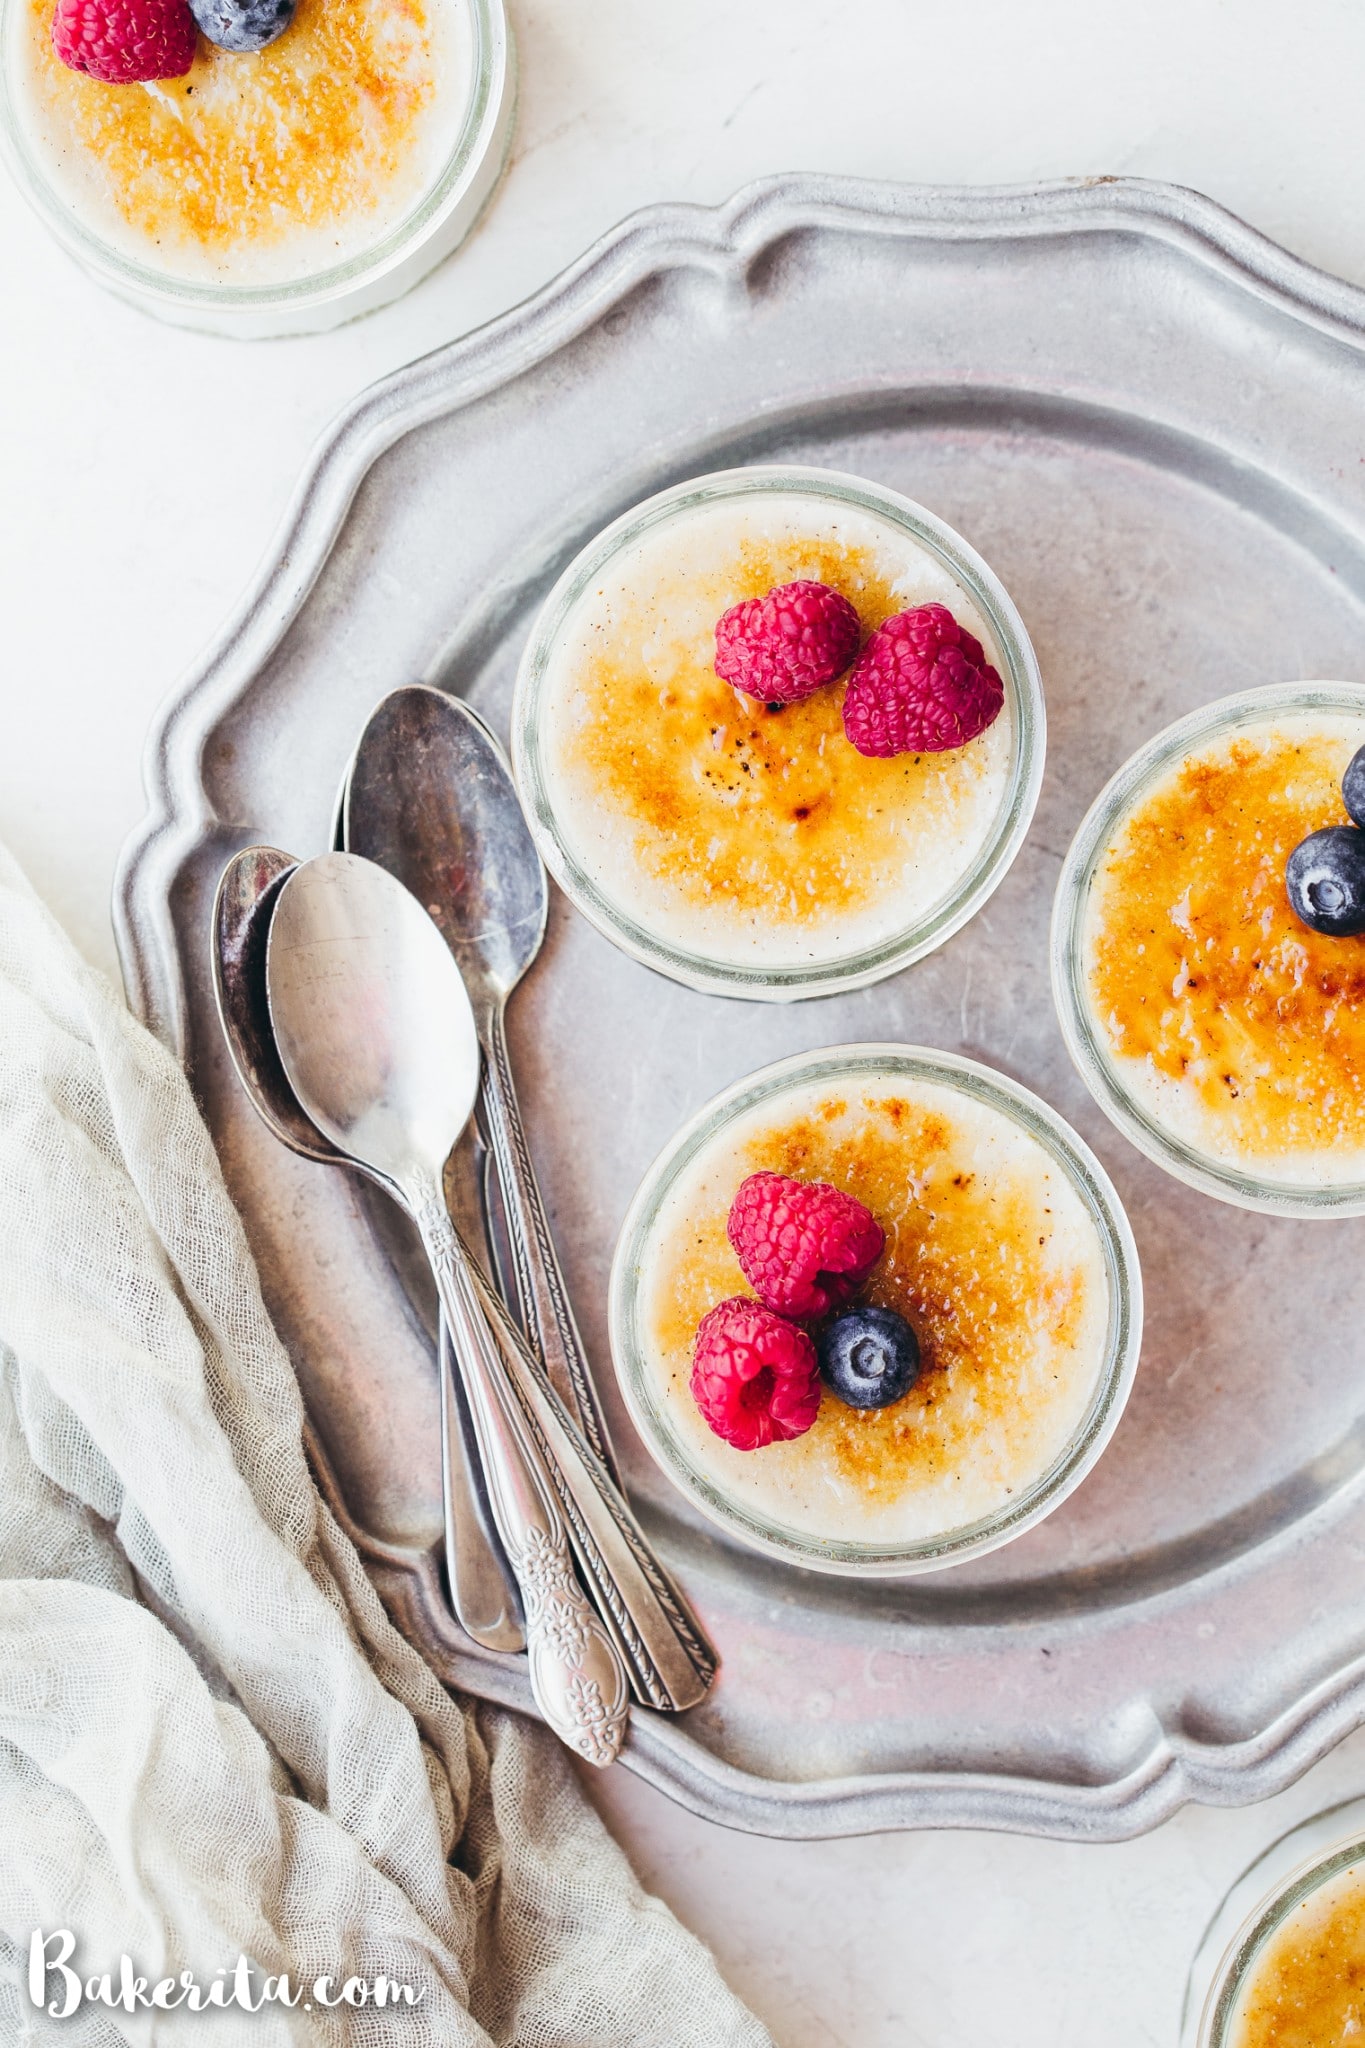 This Vegan Creme Brulee is a twist on the traditional French dessert that translates to "burnt cream". By using coconut milk and all-natural sweeteners, we make a paleo and vegan version of this classic dessert.